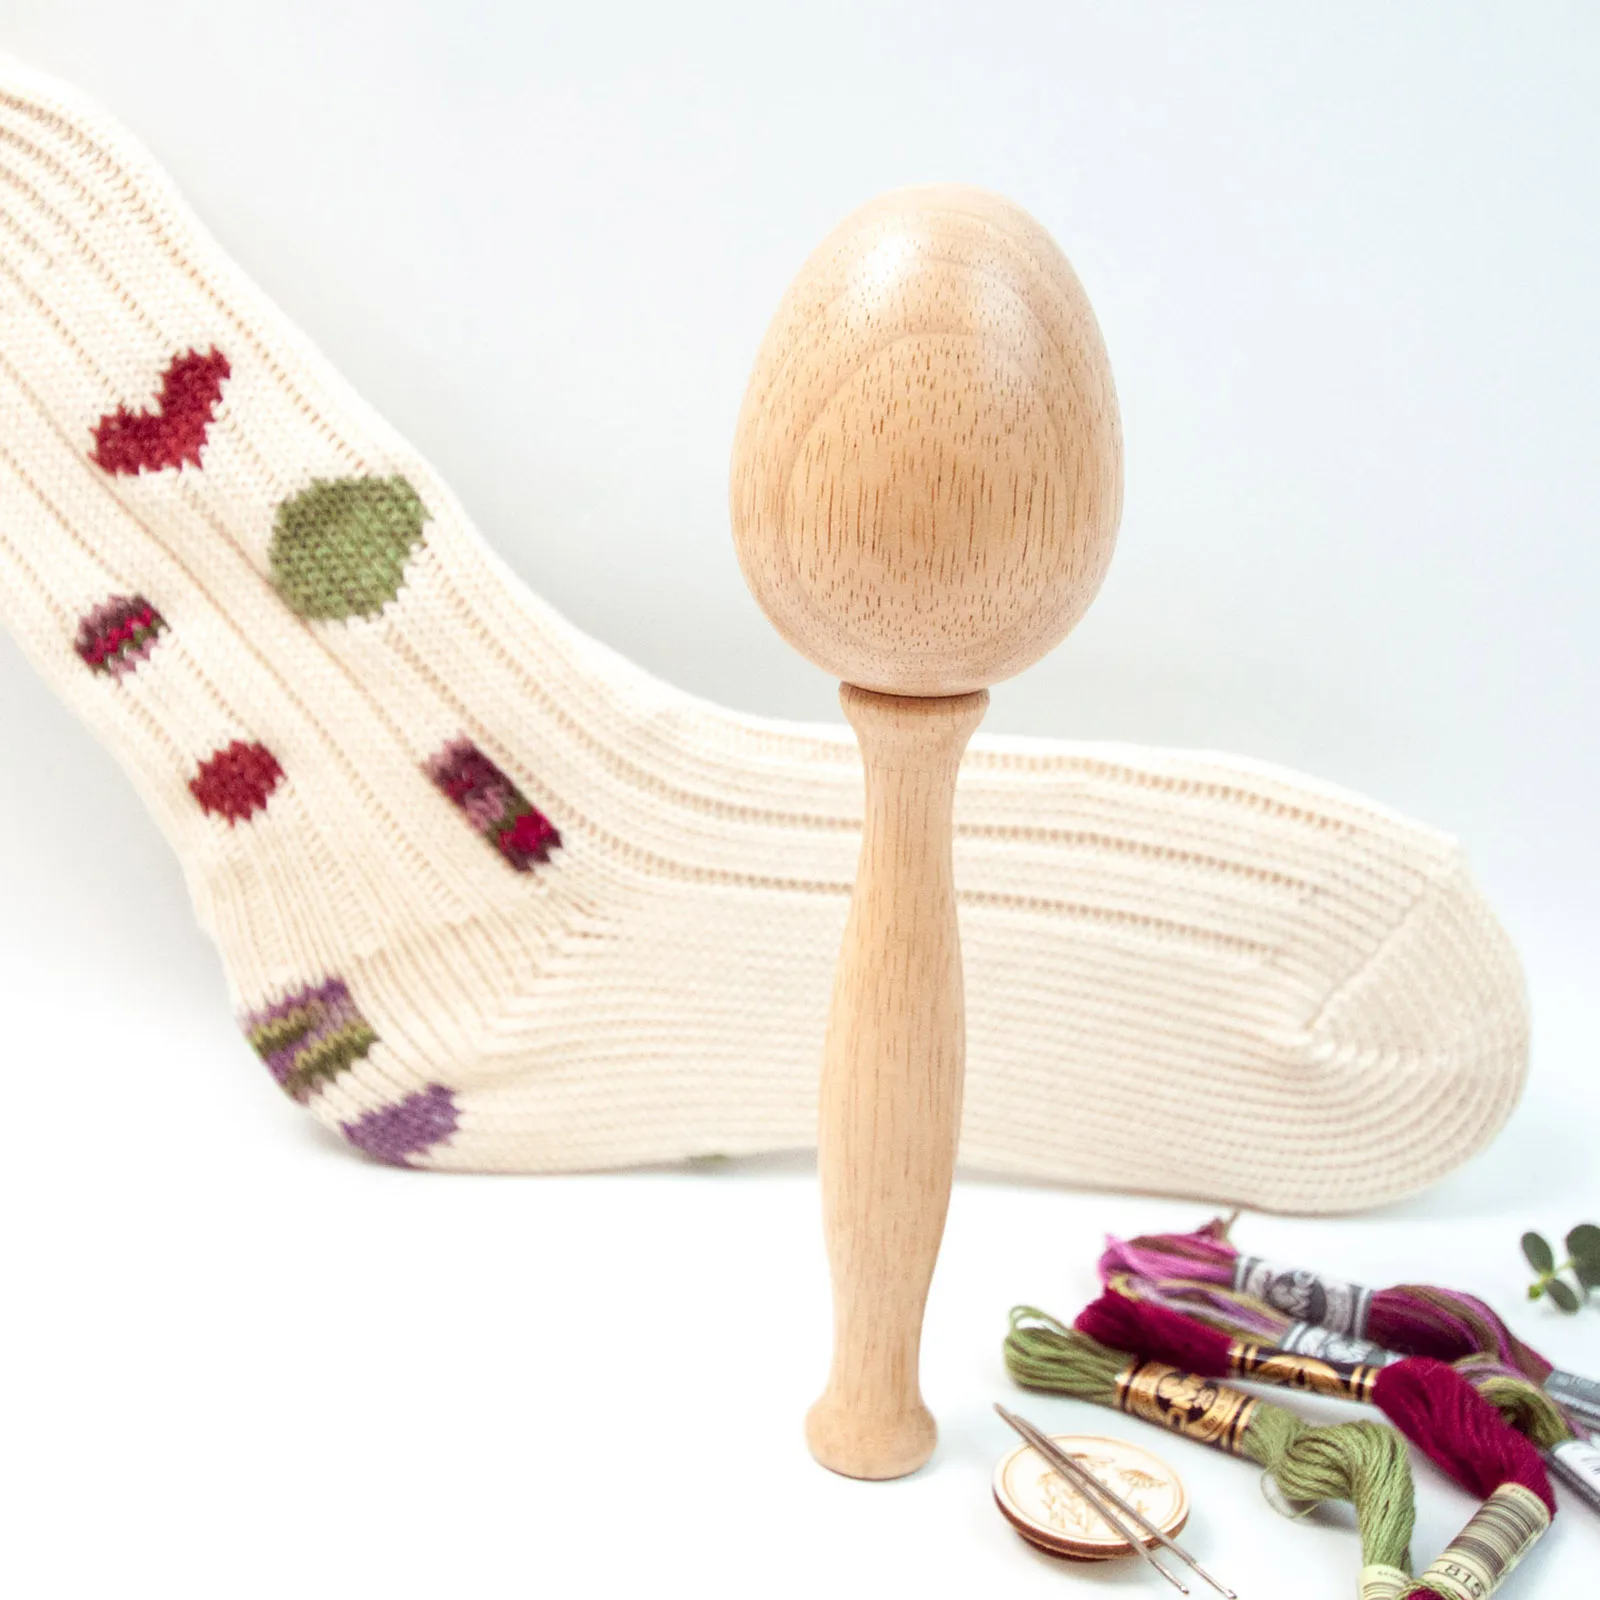 1Set DIY Wood Darning Egg Sewing Tool Mushroom Needle Case Patching Tools  For Clothes Socks Handicraft Home Sewing Accessories